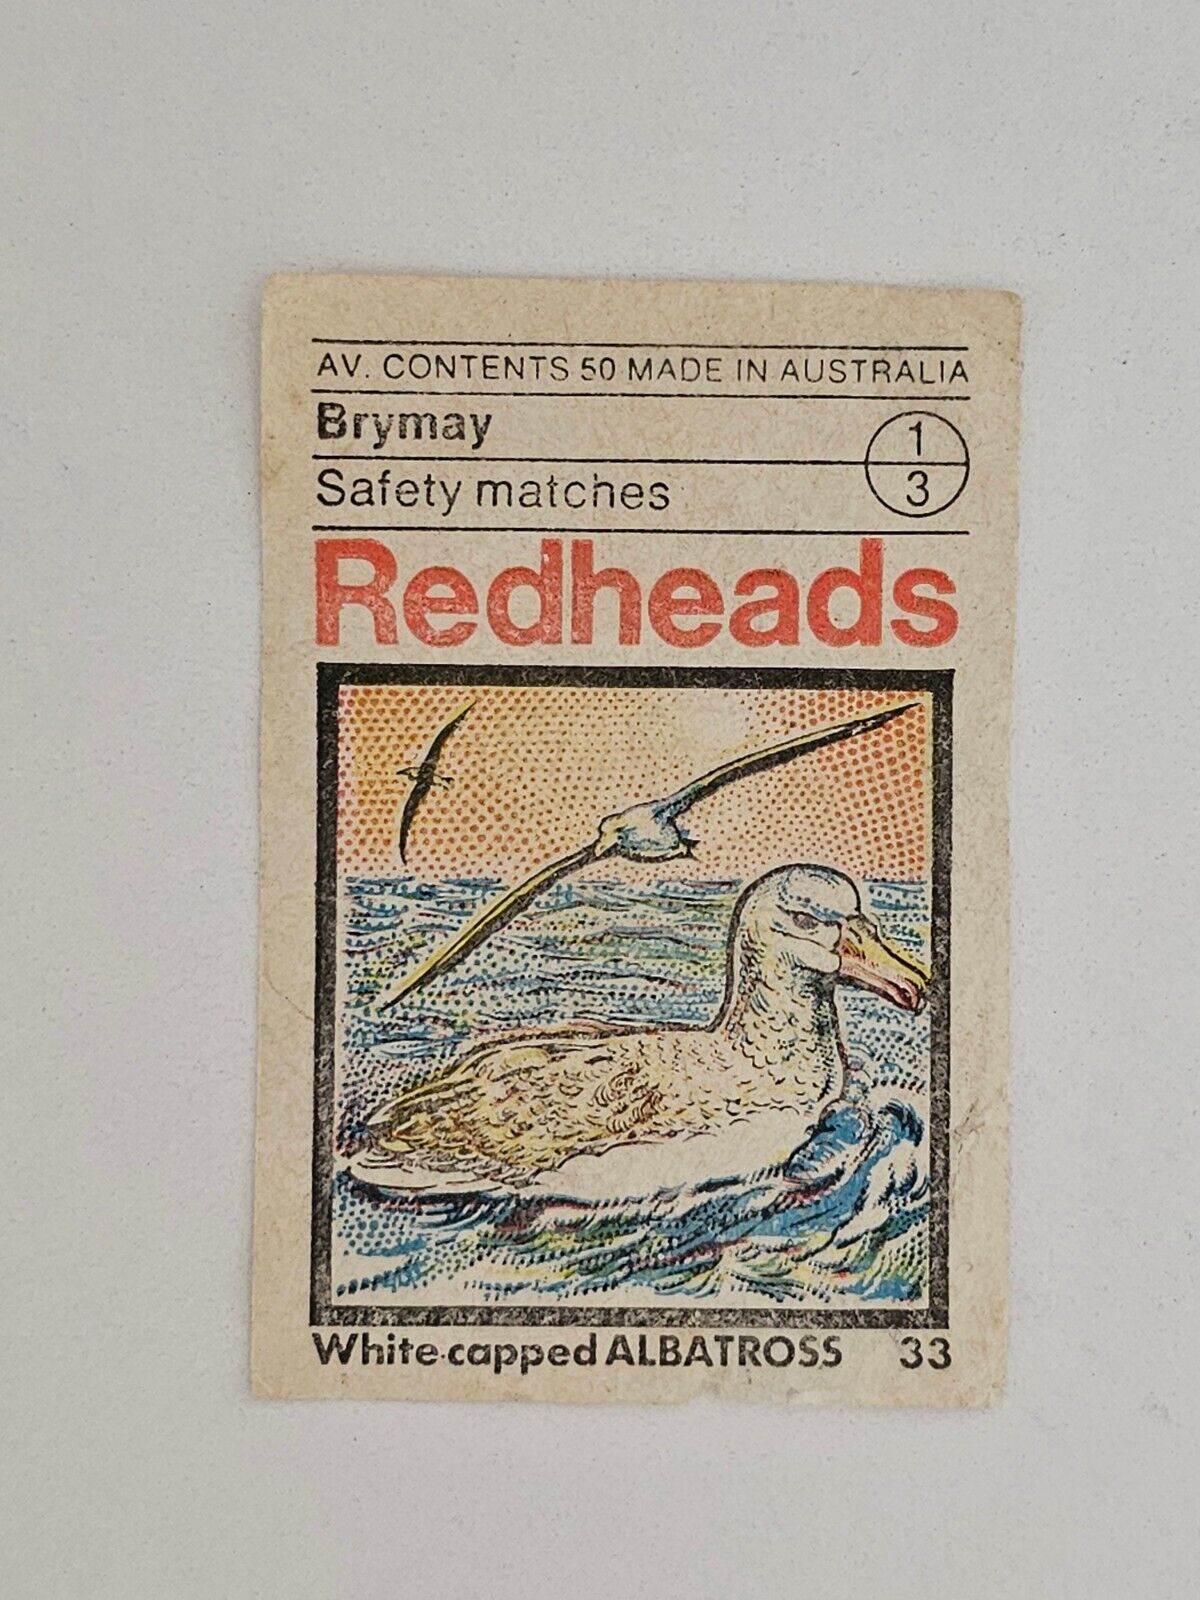 BRYMAY Redheads Matchbox Label White capped Albatross #33 (ML191)